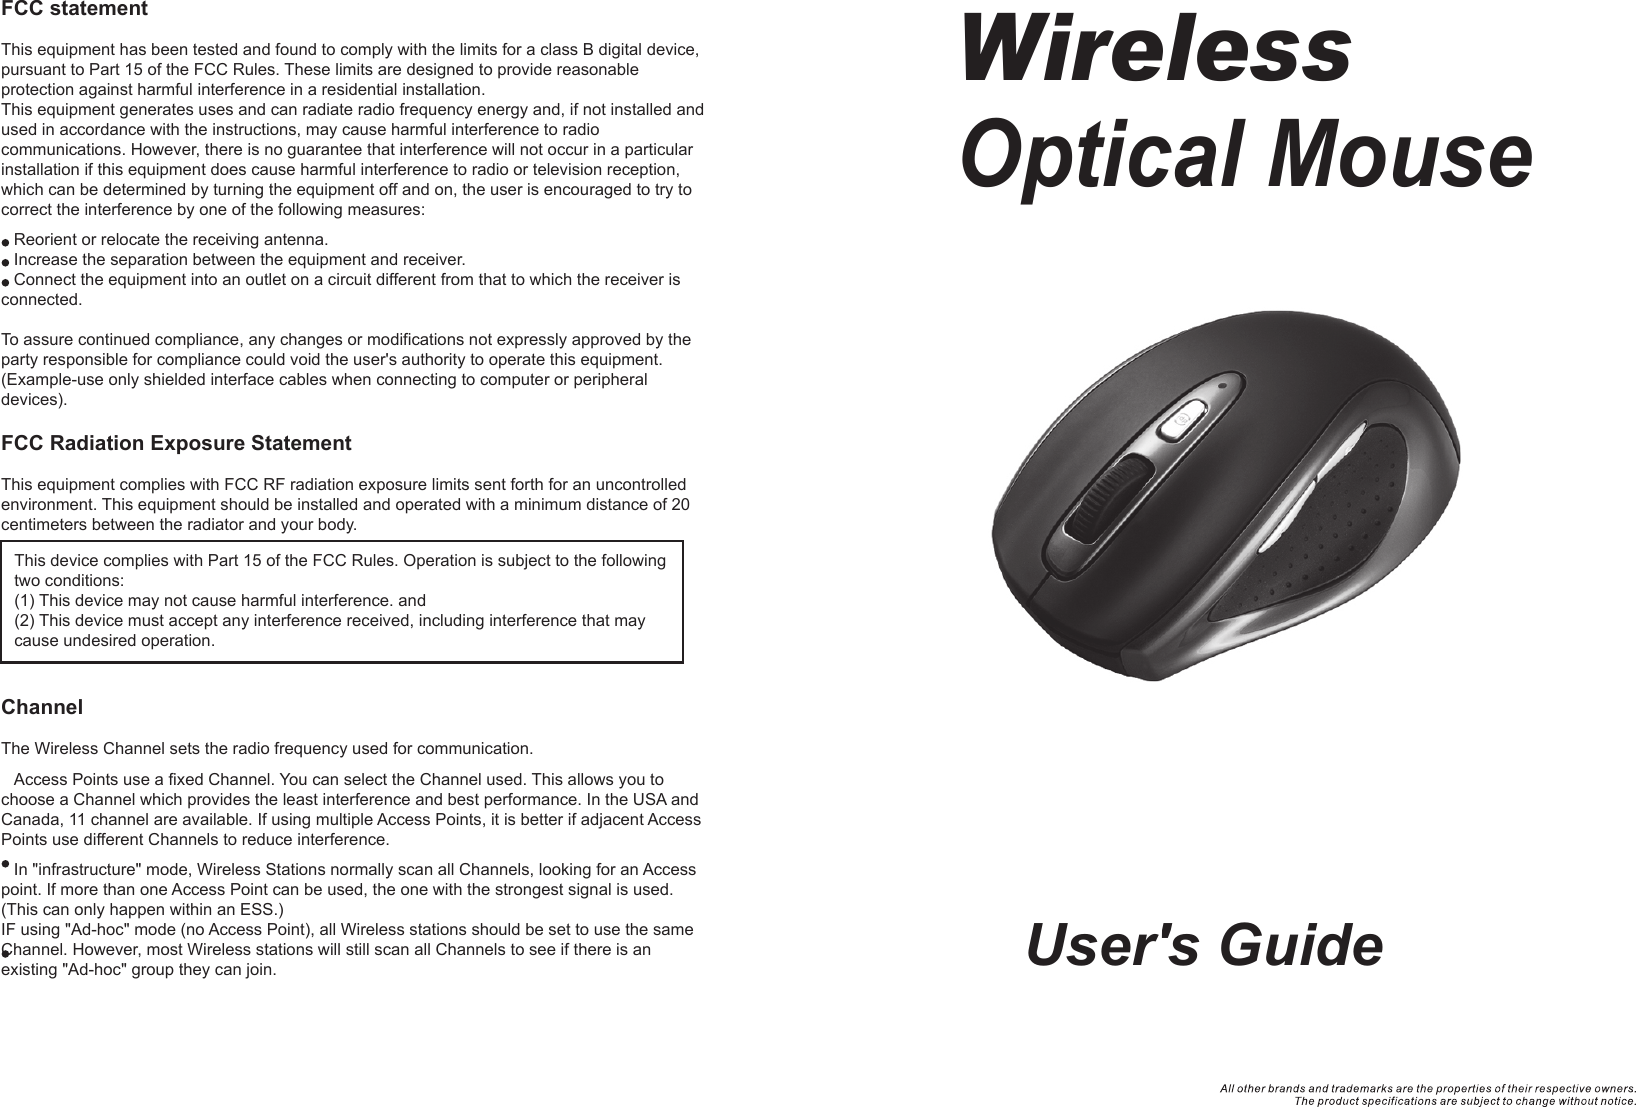 User&apos;s GuideWirelessOptical Mouse  FCC statementThis equipment has been tested and found to comply with the limits for a class B digital device, pursuant to Part 15 of the FCC Rules. These limits are designed to provide reasonable protection against harmful interference in a residential installation.This equipment generates uses and can radiate radio frequency energy and, if not installed and used in accordance with the instructions, may cause harmful interference to radio communications. However, there is no guarantee that interference will not occur in a particular installation if this equipment does cause harmful interference to radio or television reception, which can be determined by turning the equipment off and on, the user is encouraged to try to correct the interference by one of the following measures:Reorient or relocate the receiving antenna.Increase the separation between the equipment and receiver.Connect the equipment into an outlet on a circuit different from that to which the receiver is connected.To assure continued compliance, any changes or modifications not expressly approved by the party responsible for compliance could void the user&apos;s authority to operate this equipment. (Example-use only shielded interface cables when connecting to computer or peripheral devices).FCC Radiation Exposure StatementThis equipment complies with FCC RF radiation exposure limits sent forth for an uncontrolled environment. This equipment should be installed and operated with a minimum distance of 20 centimeters between the radiator and your body. ChannelThe Wireless Channel sets the radio frequency used for communication.Access Points use a fixed Channel. You can select the Channel used. This allows you to choose a Channel which provides the least interference and best performance. In the USA and Canada, 11 channel are available. If using multiple Access Points, it is better if adjacent Access Points use different Channels to reduce interference.In &quot;infrastructure&quot; mode, Wireless Stations normally scan all Channels, looking for an Access point. If more than one Access Point can be used, the one with the strongest signal is used. (This can only happen within an ESS.)IF using &quot;Ad-hoc&quot; mode (no Access Point), all Wireless stations should be set to use the same Channel. However, most Wireless stations will still scan all Channels to see if there is an existing &quot;Ad-hoc&quot; group they can join.This device complies with Part 15 of the FCC Rules. Operation is subject to the following two conditions:(1) This device may not cause harmful interference. and (2) This device must accept any interference received, including interference that may cause undesired operation.